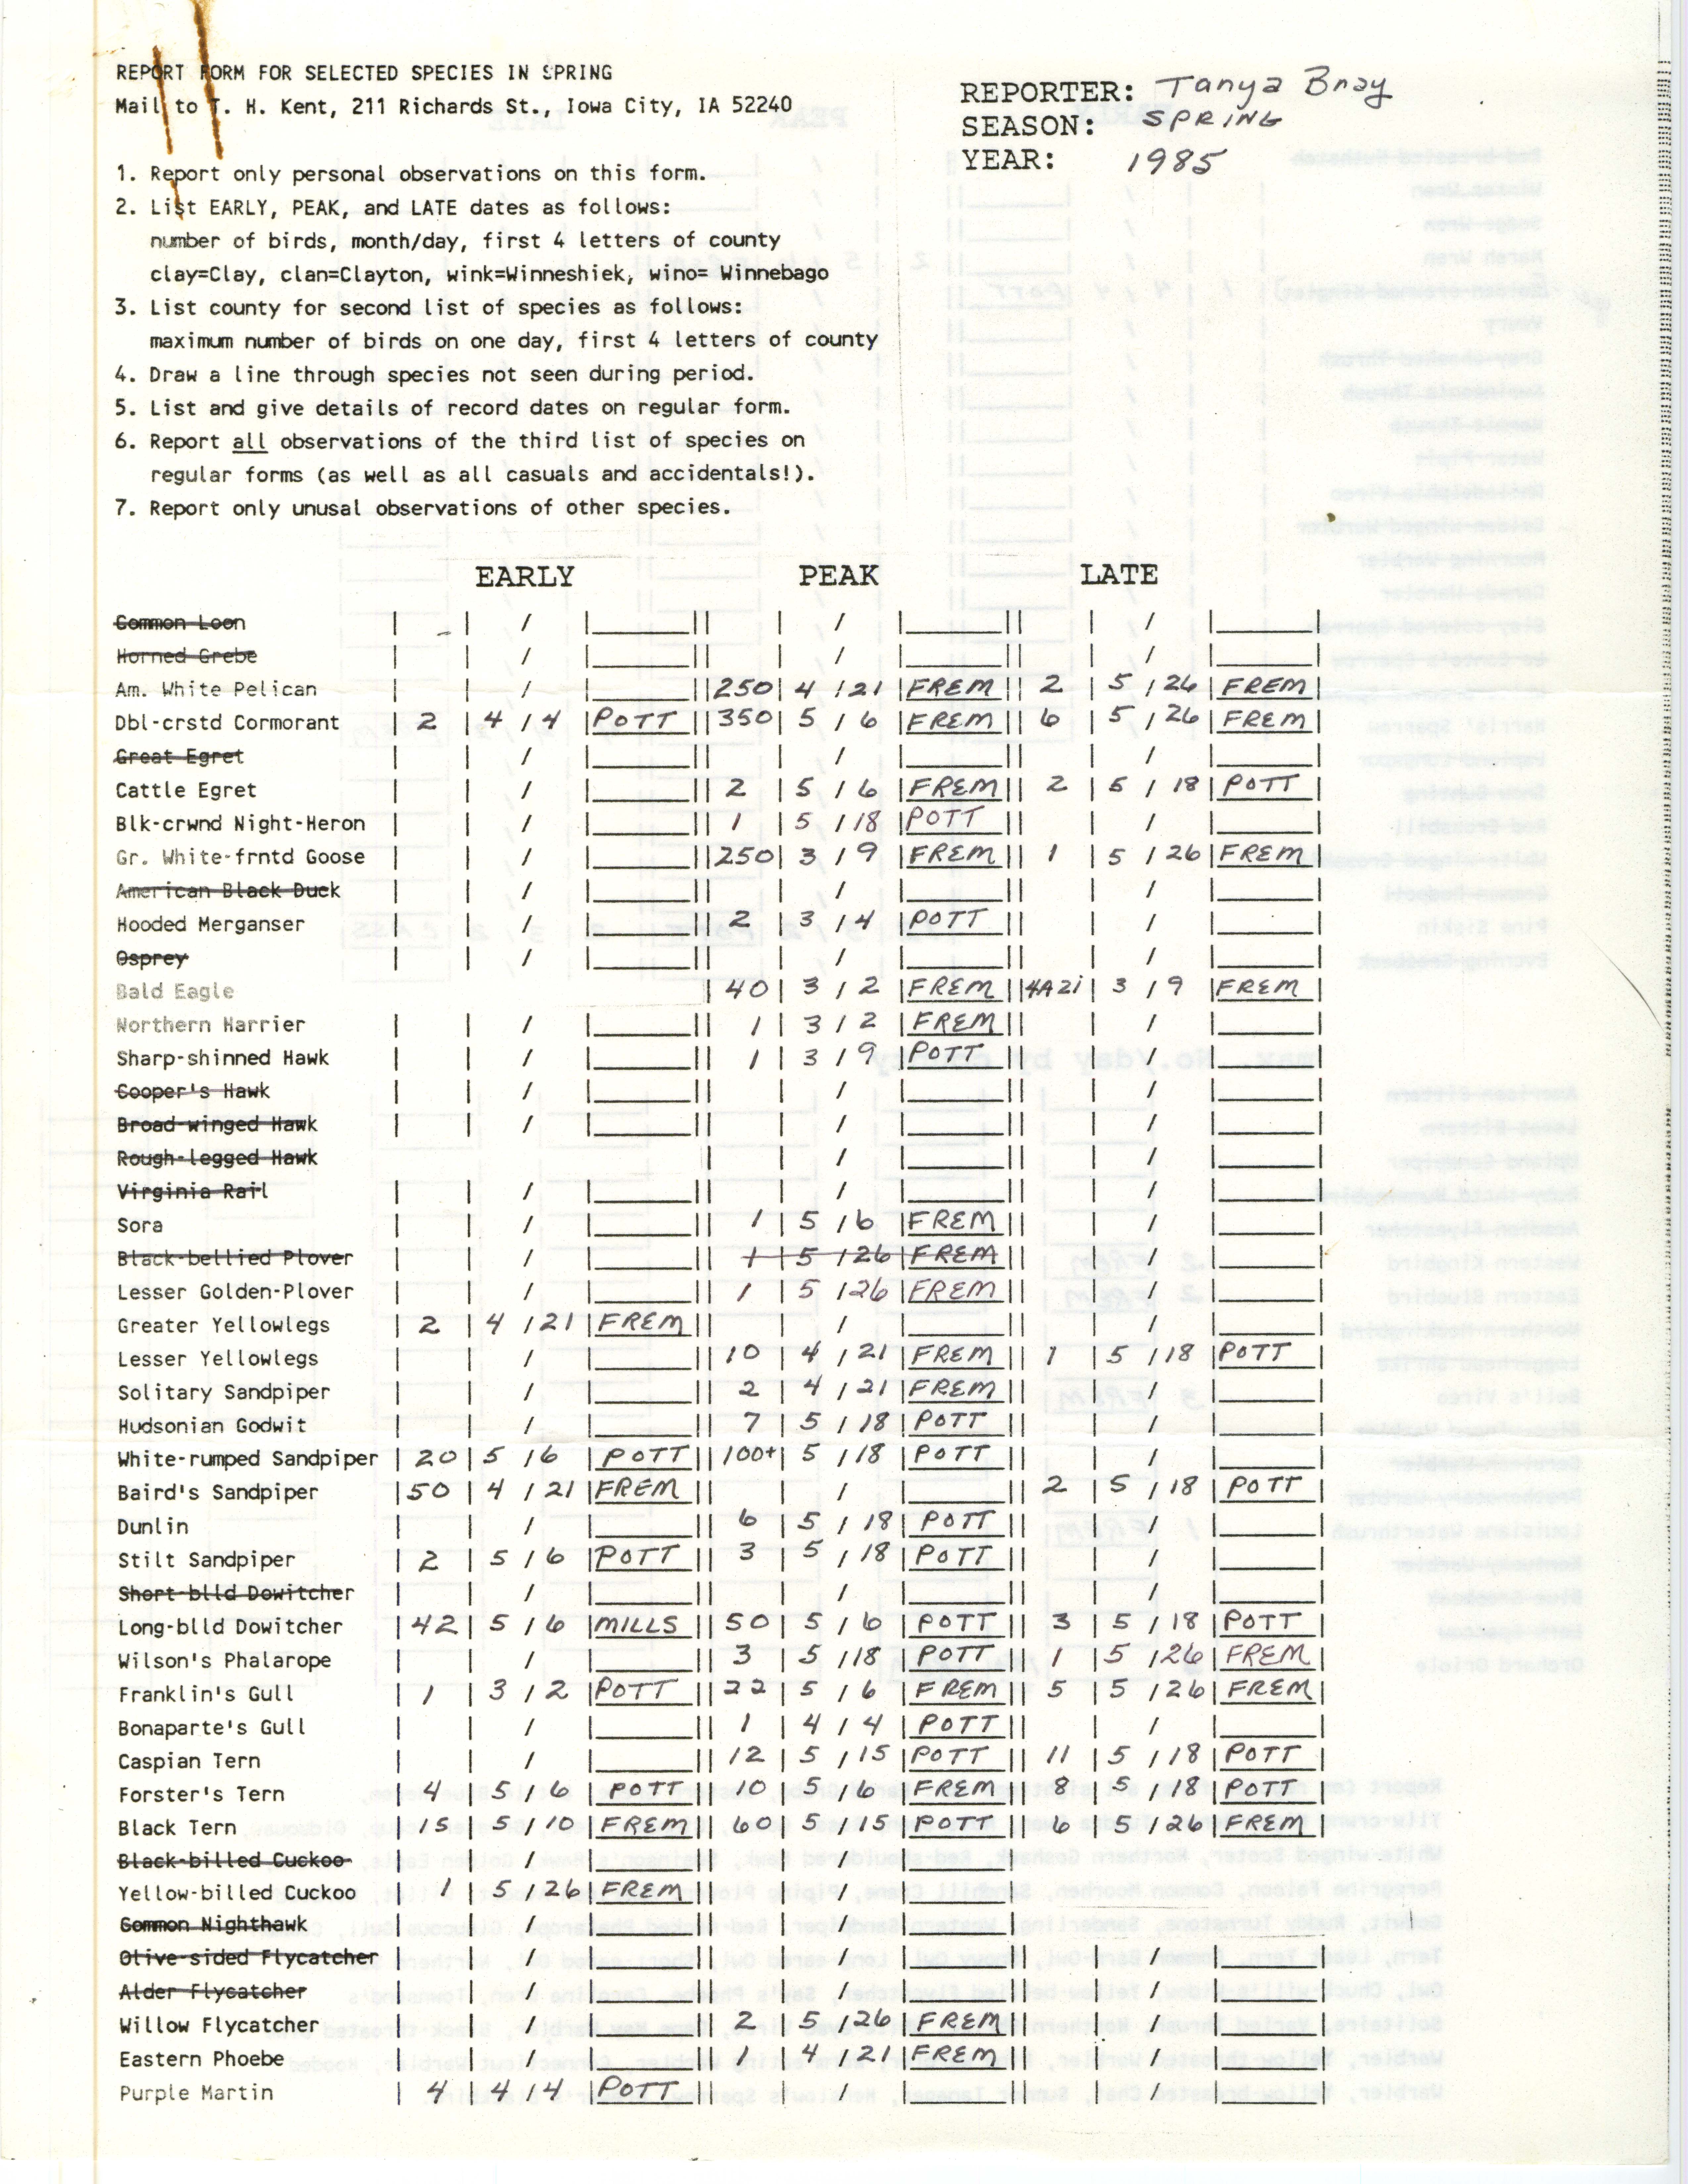 Report form for selected species in spring, contributed by Tanya Bray, spring 1985